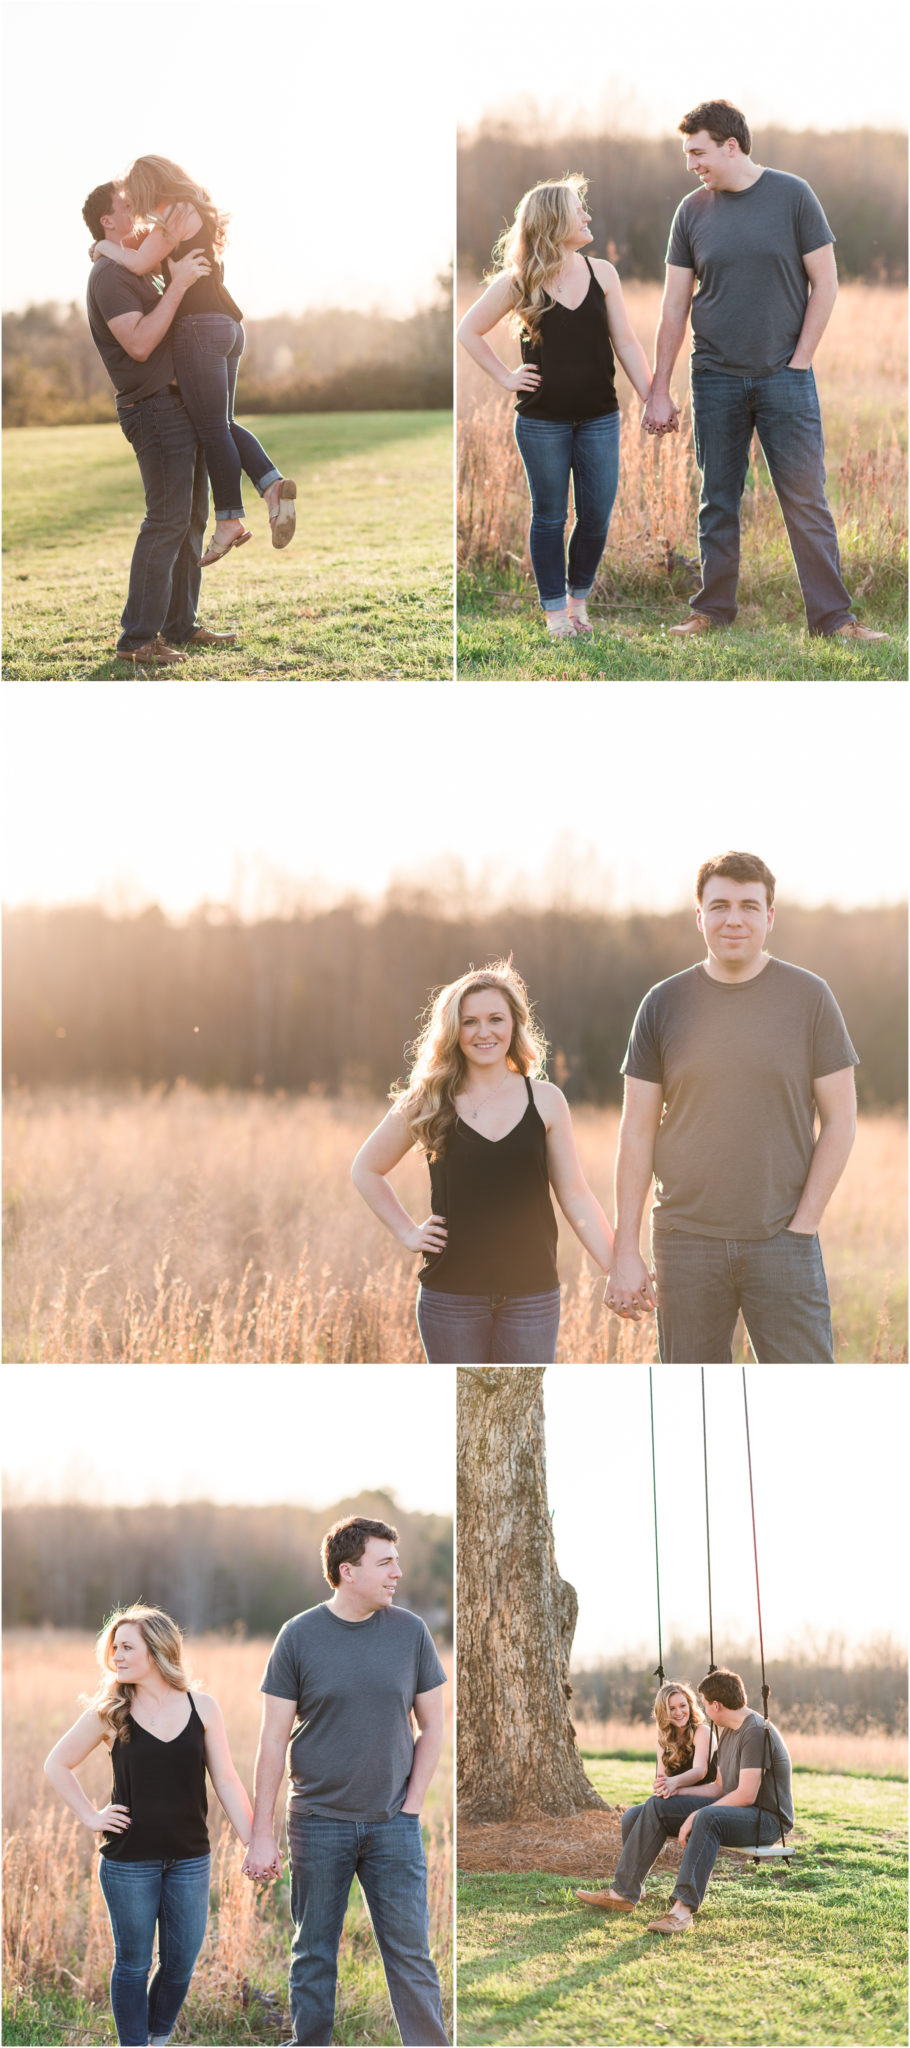 Spring Ellery Farms Engagement Session 